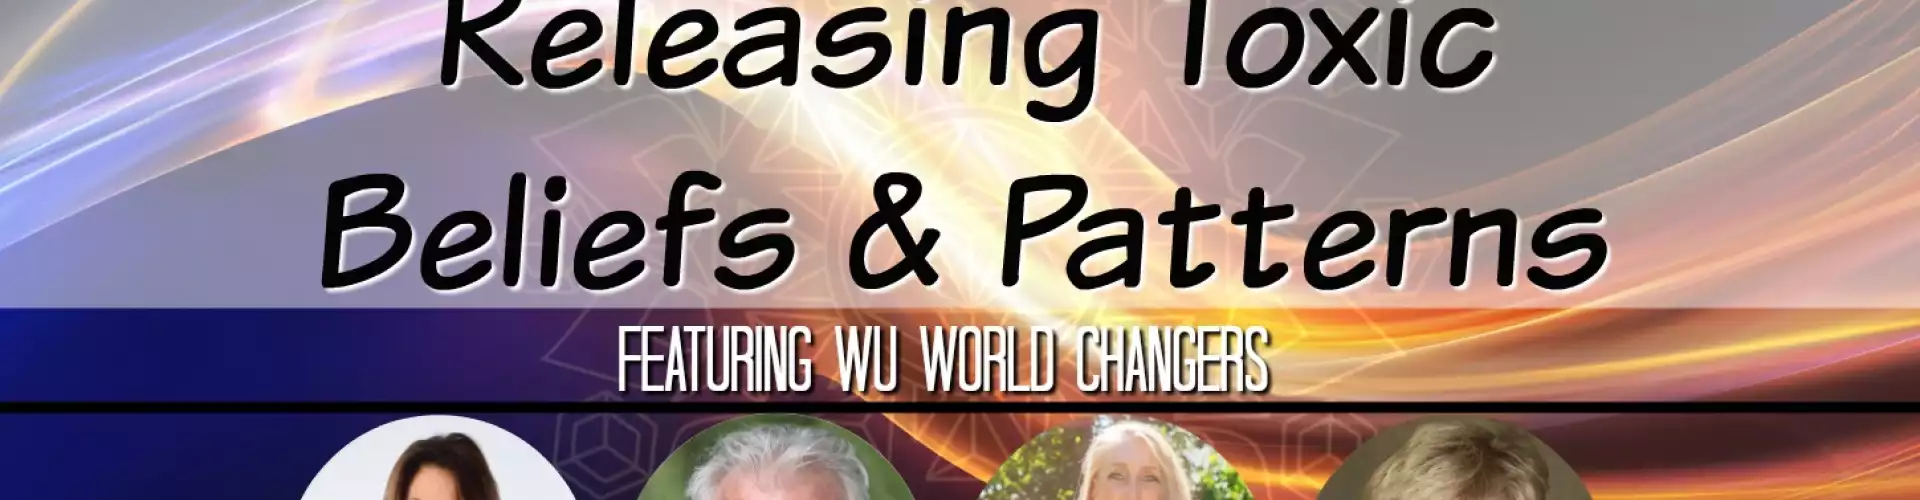 WU Expert Panel February 2019: Releasing Toxic Beliefs and Patterns